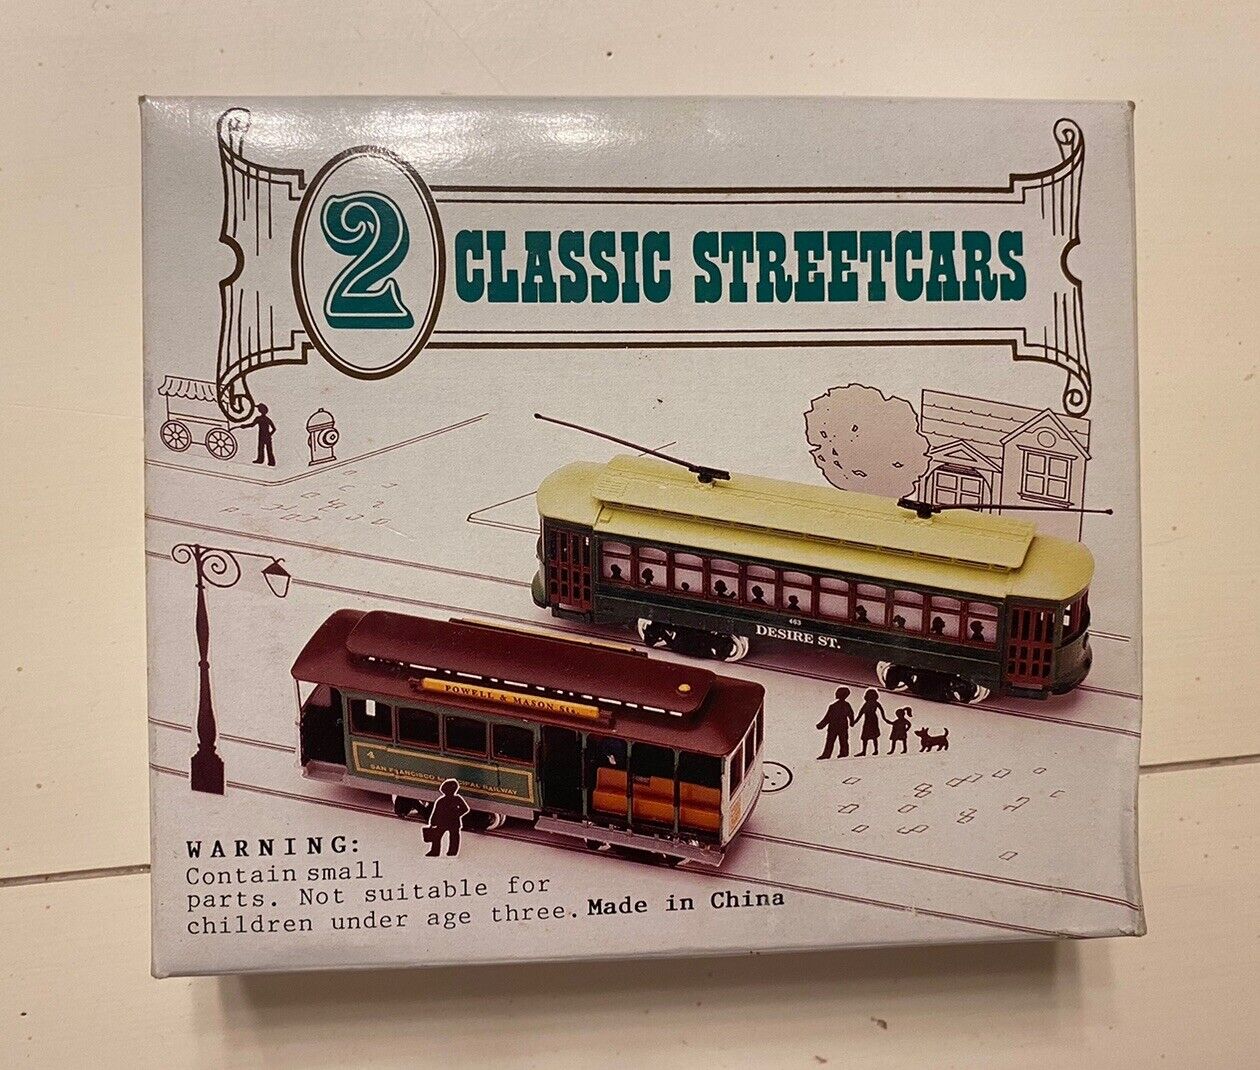 Classic Street Cars HO Scale San Francisco Cable Car & Desire Street Trolley (2) Без бренда